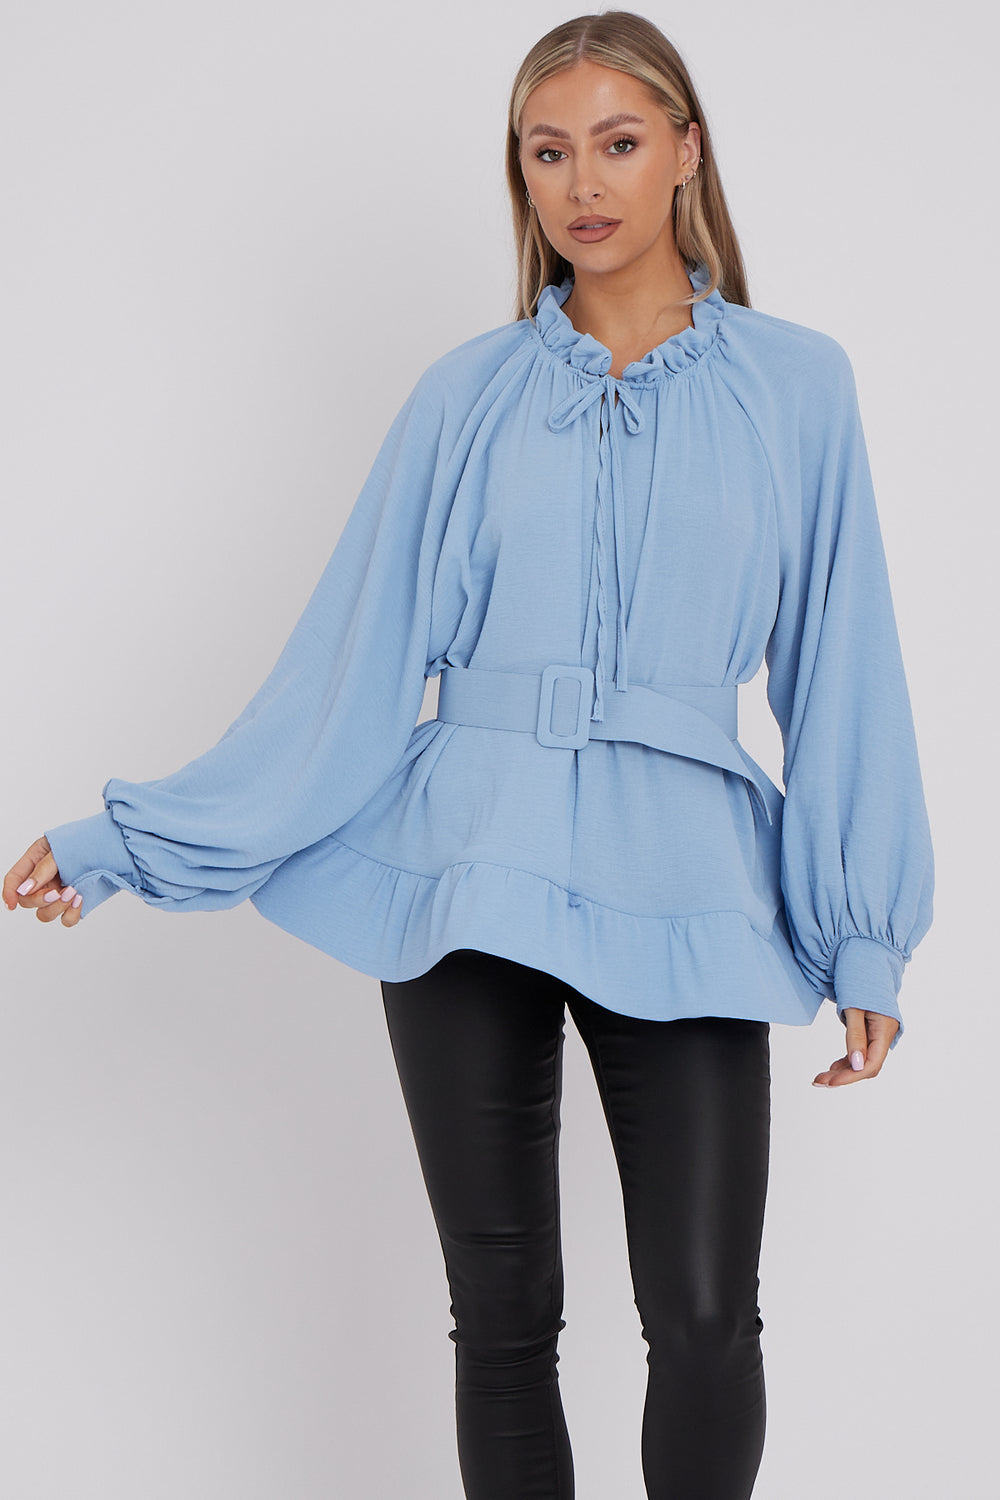 BELTED OVERSIZED TOP (8277303492856)